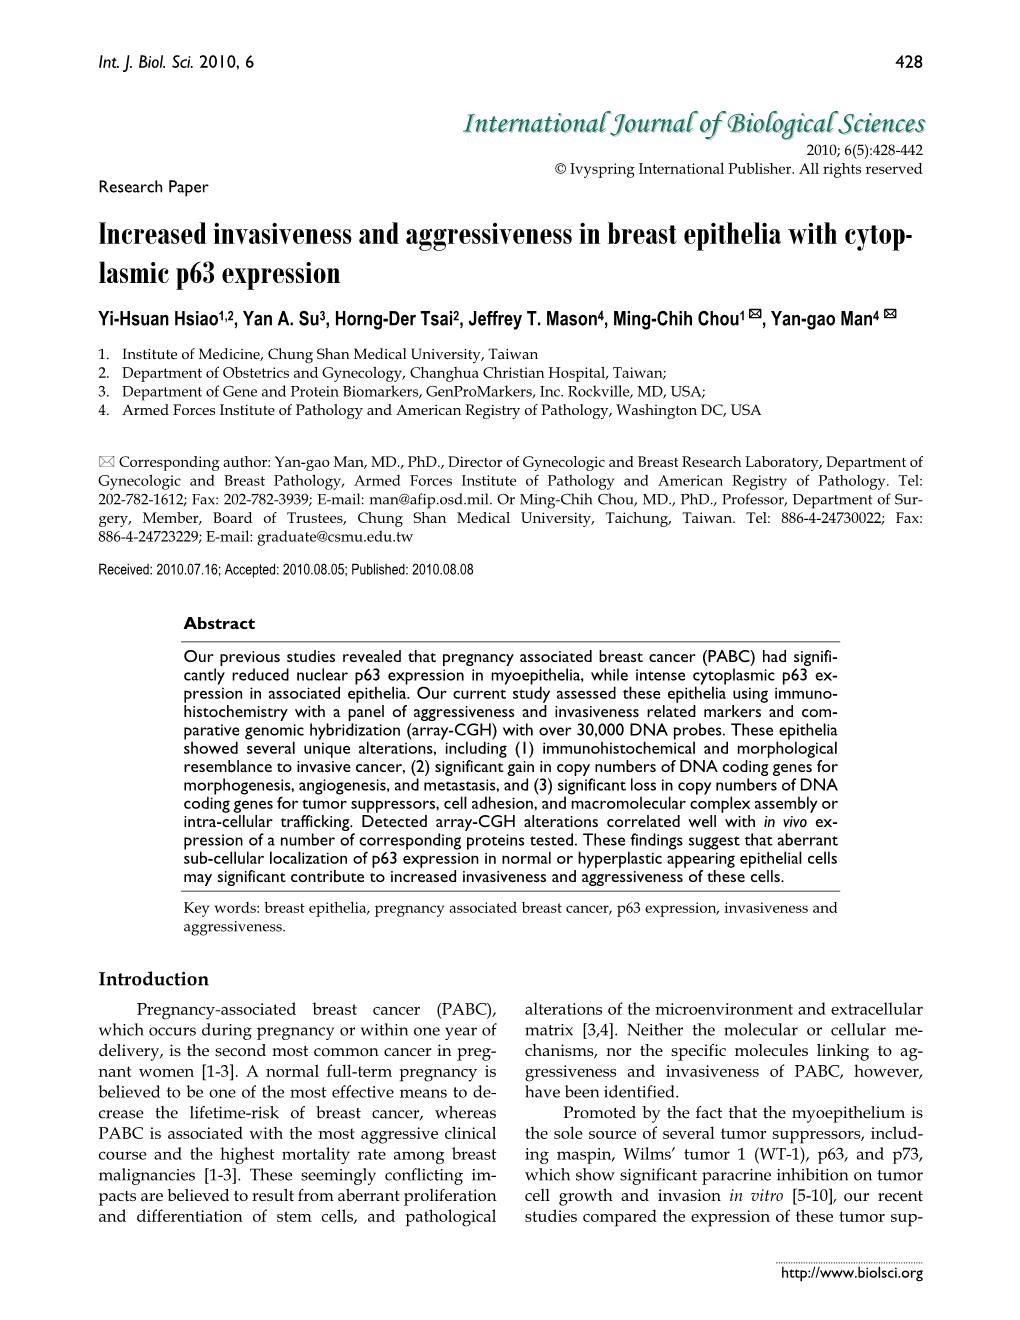 Increased Invasiveness and Aggressiveness in Breast Epithelia with Cytop- Lasmic P63 Expression Yi-Hsuan Hsiao1,2, Yan A